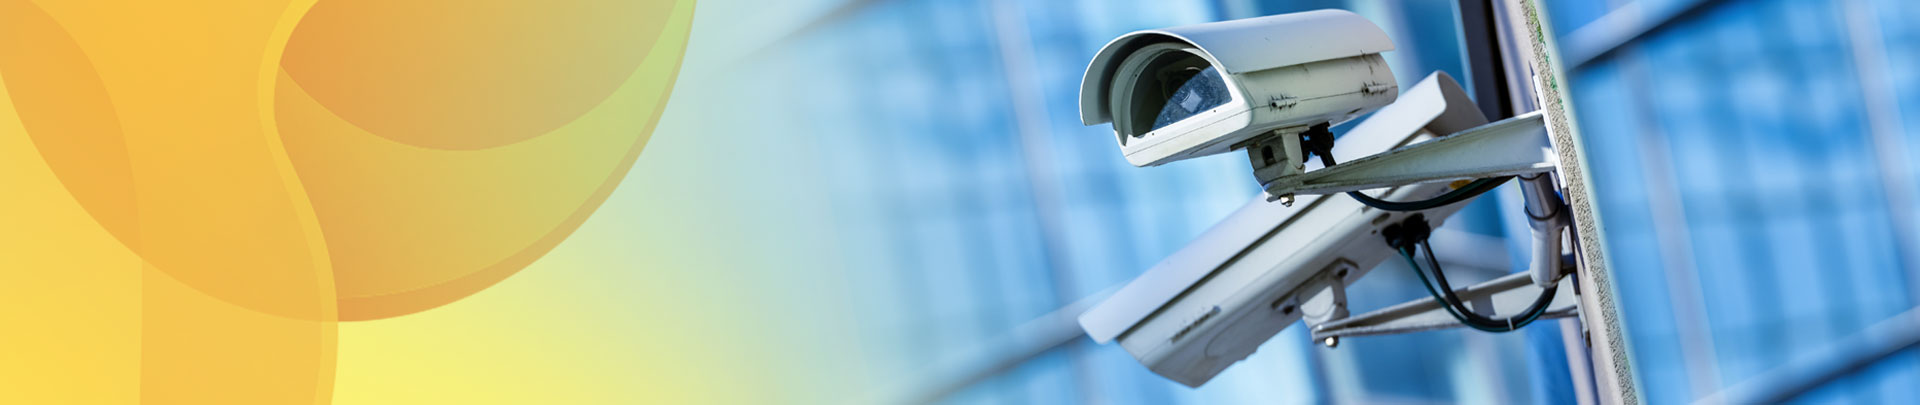 CCTV, CCTV surveillance systems, Surveillance and Security Systems